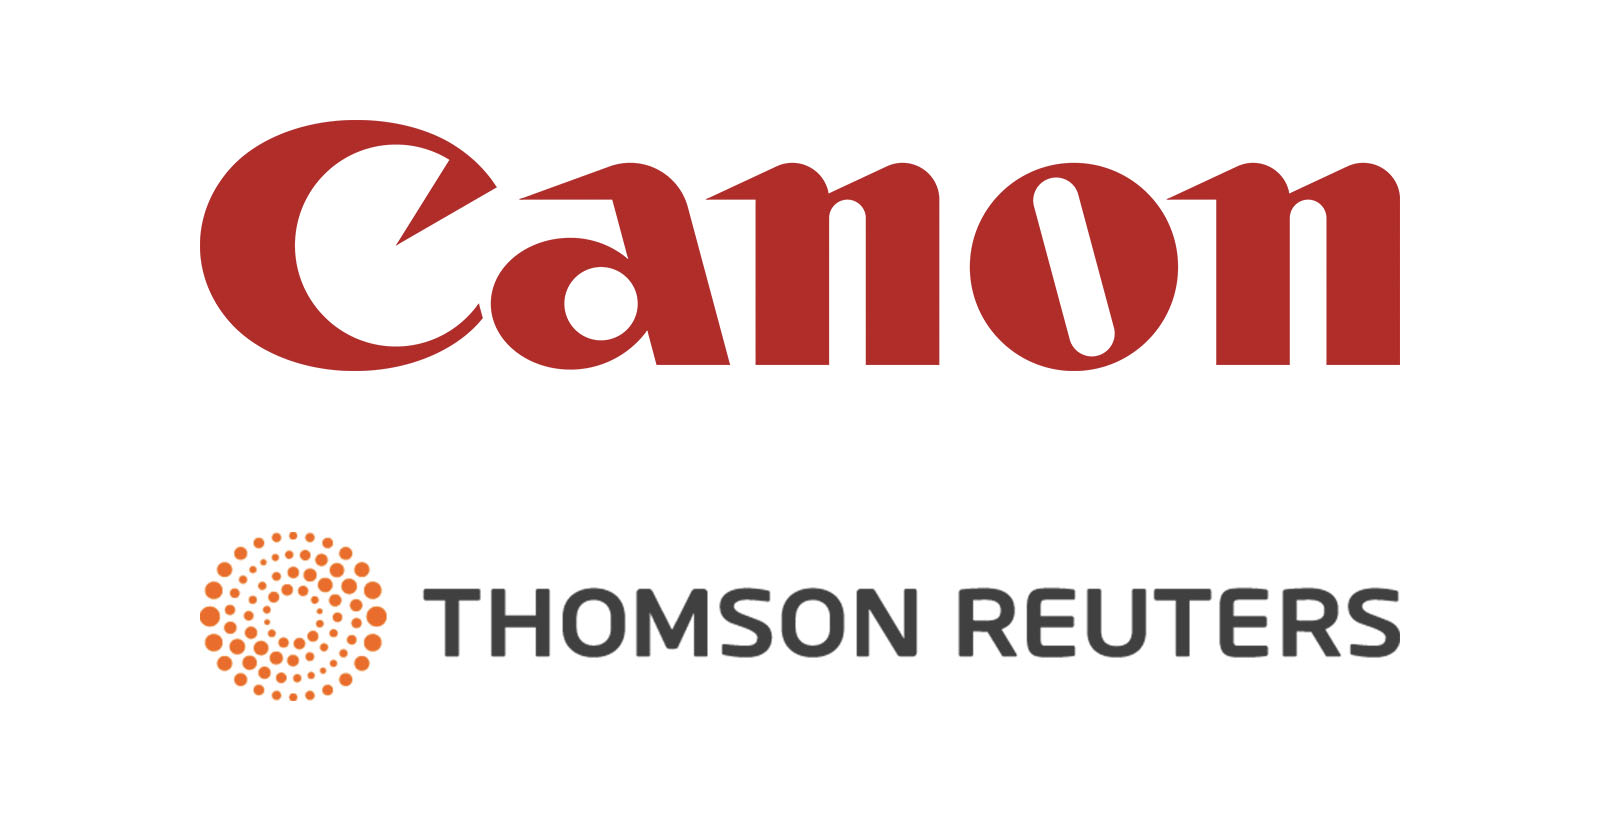 Canon and Reuters logos against a white background